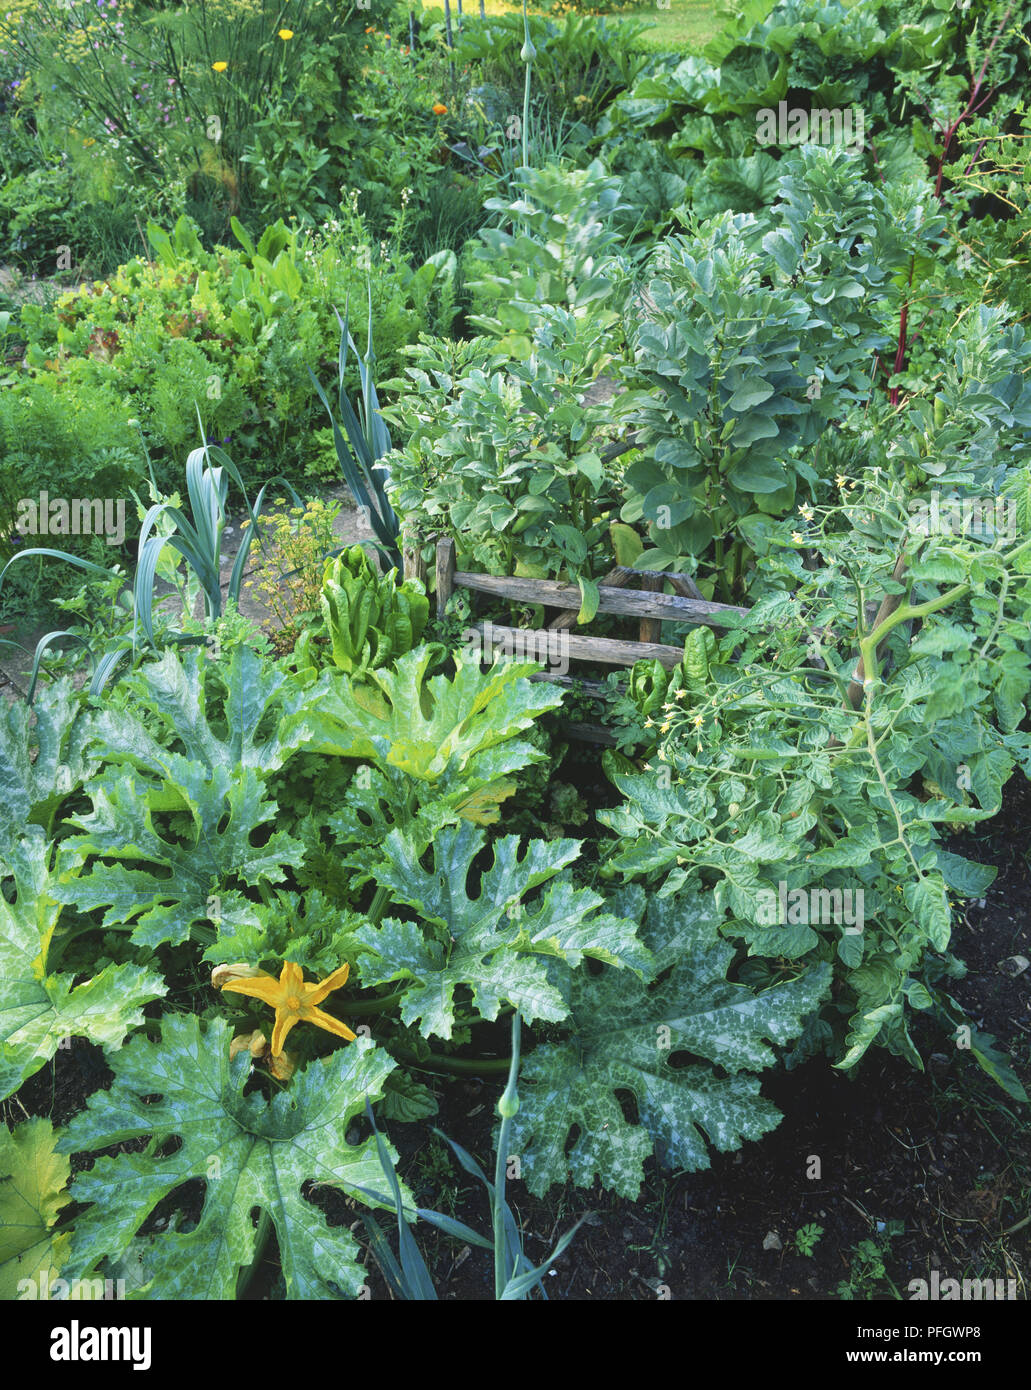 Kitchen garden with Courgette plants at front Stock Photo